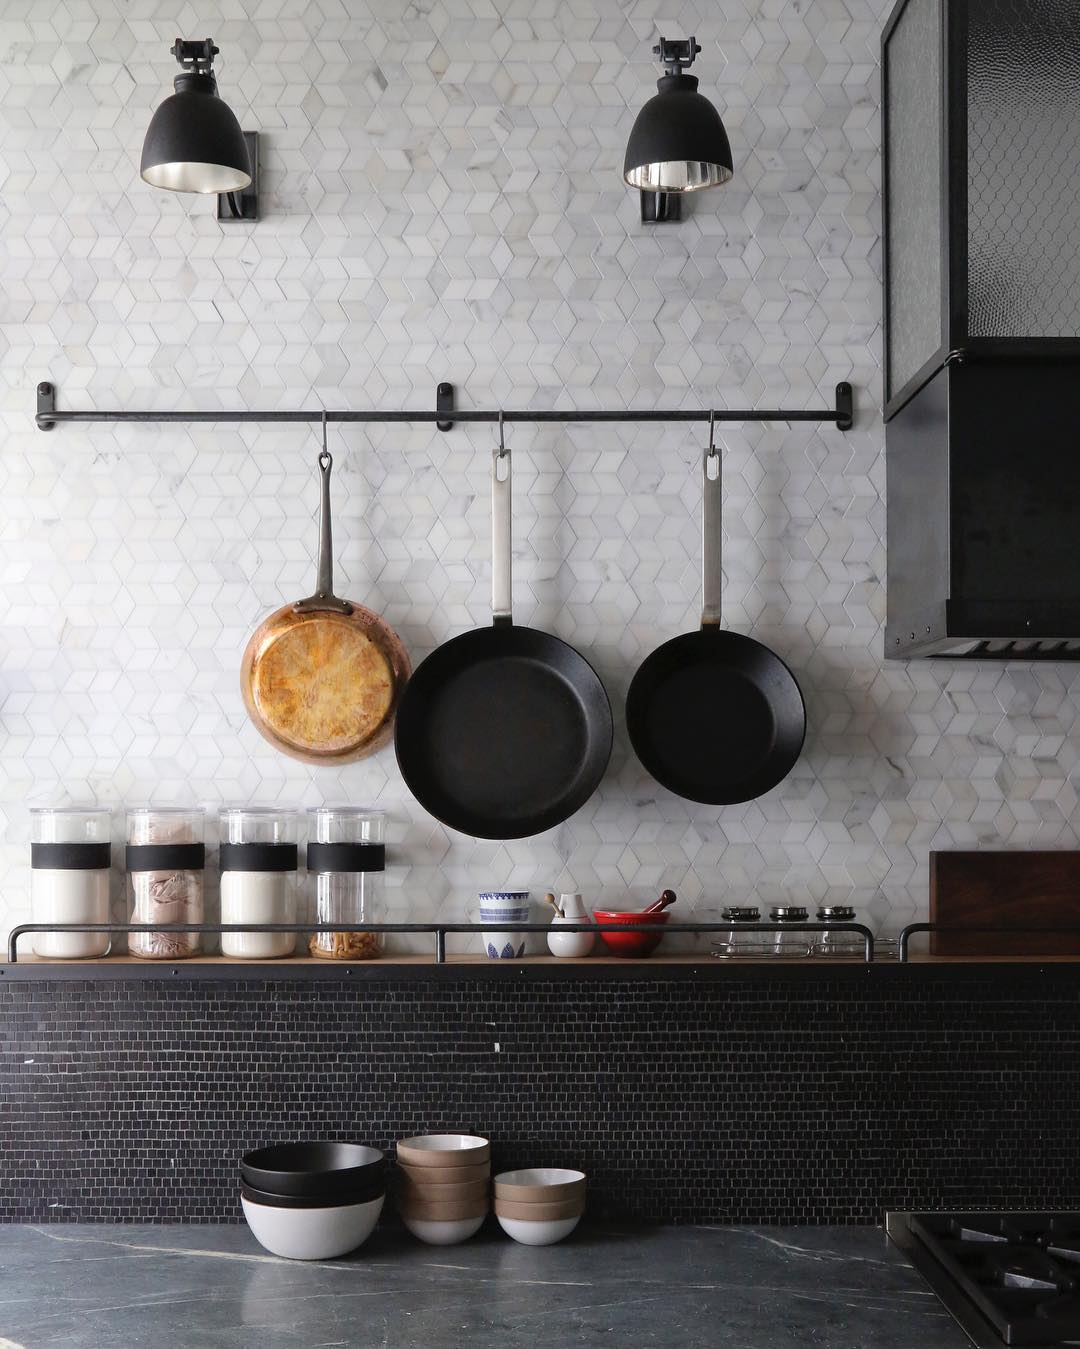 10 Creative Ways to Optimize Your Kitchen Cabinet Space